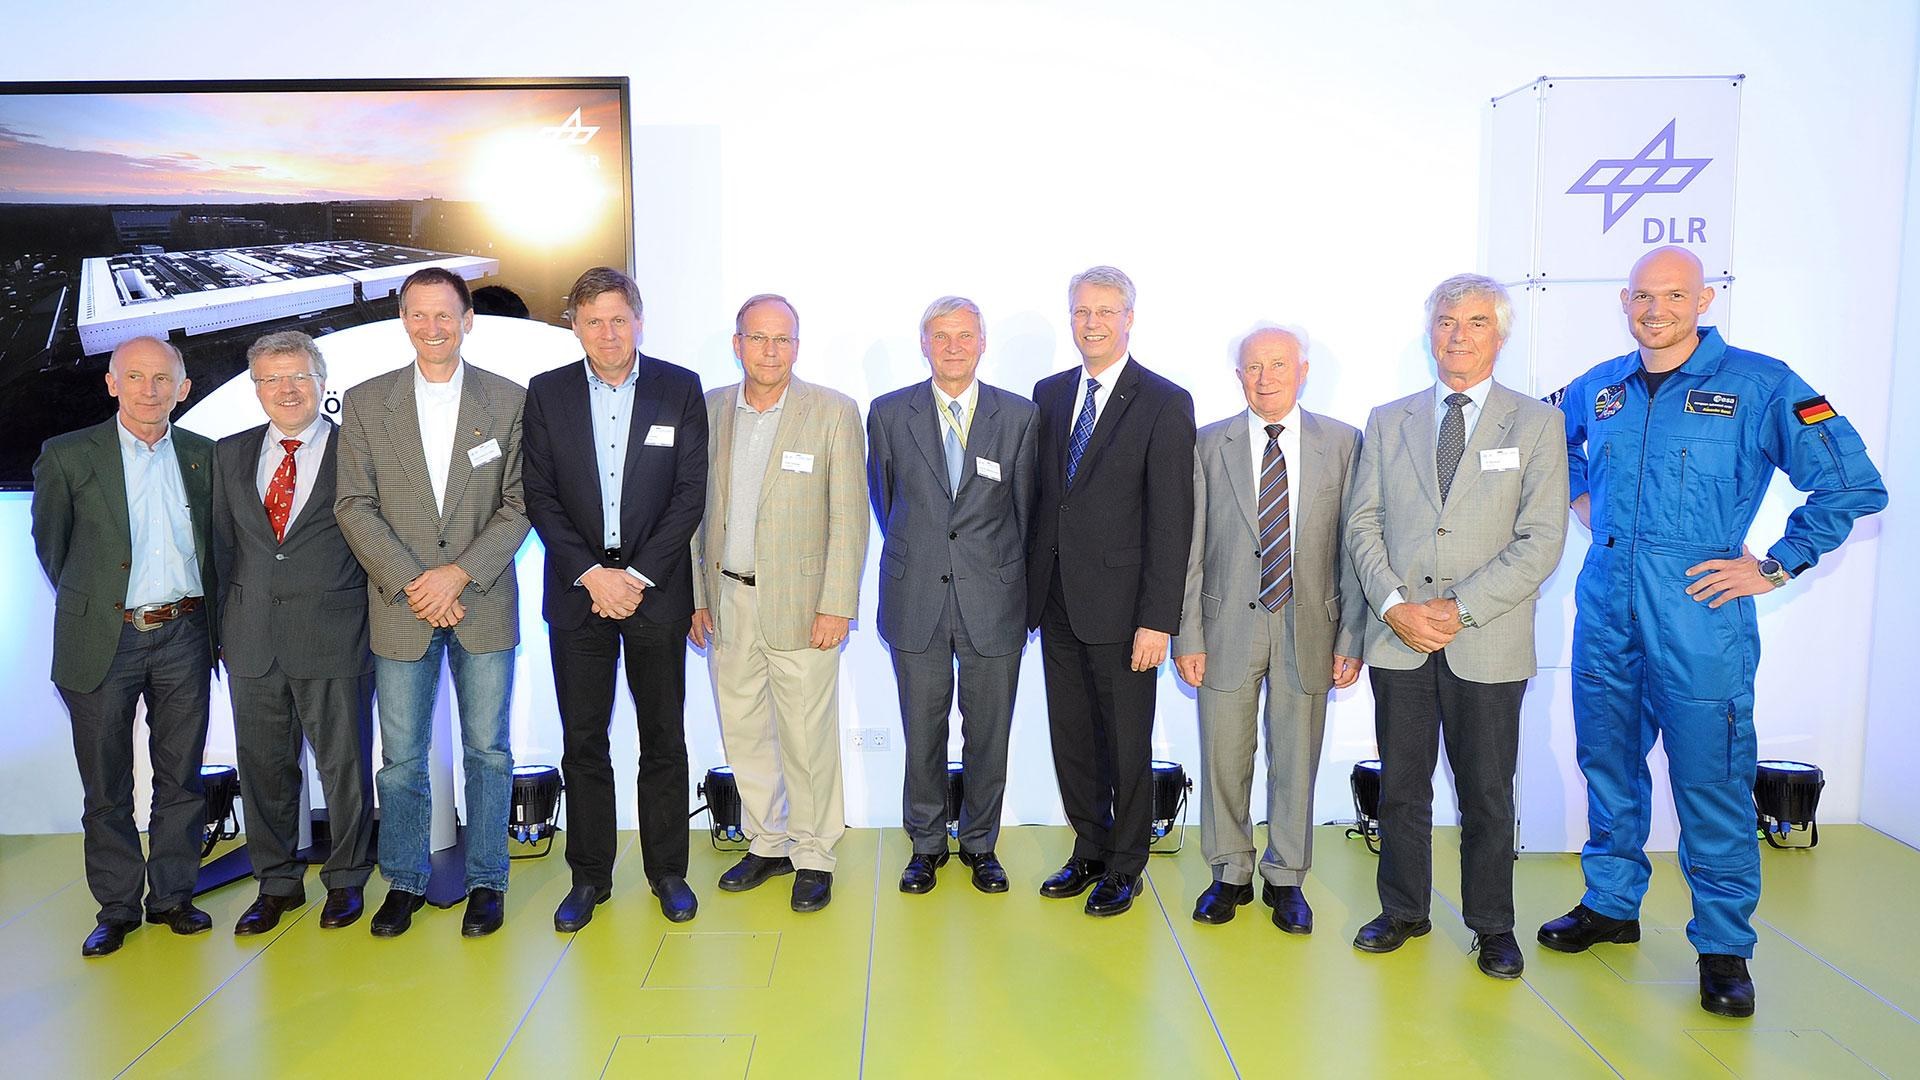 Ten German astronauts were present at the opening of :envihab in 2013